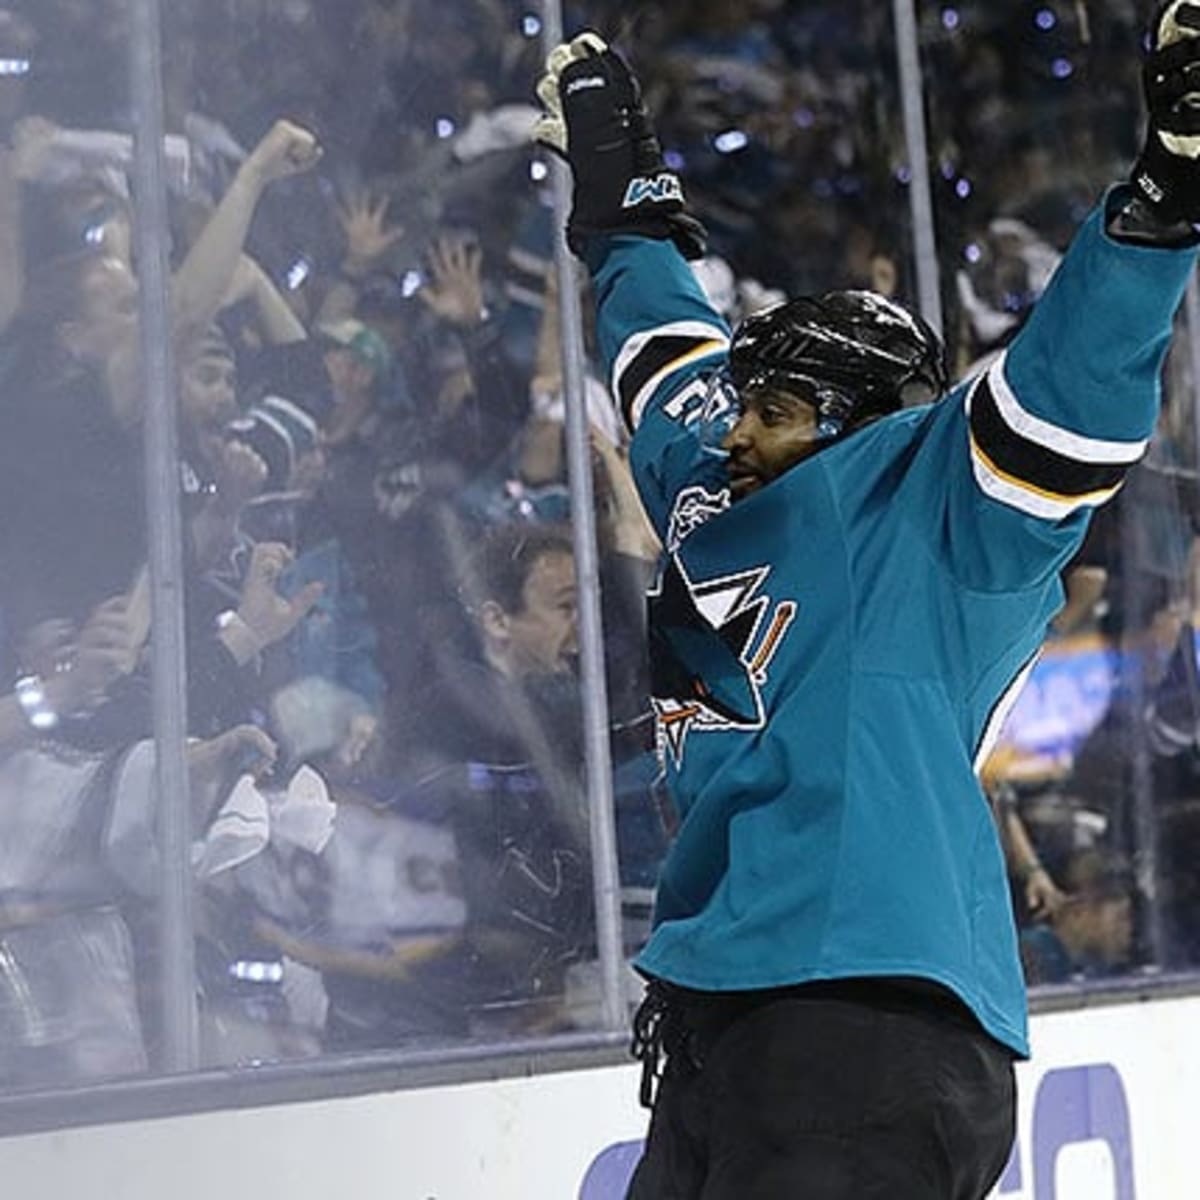 Joel Ward announces retirement after more than 700 NHL games